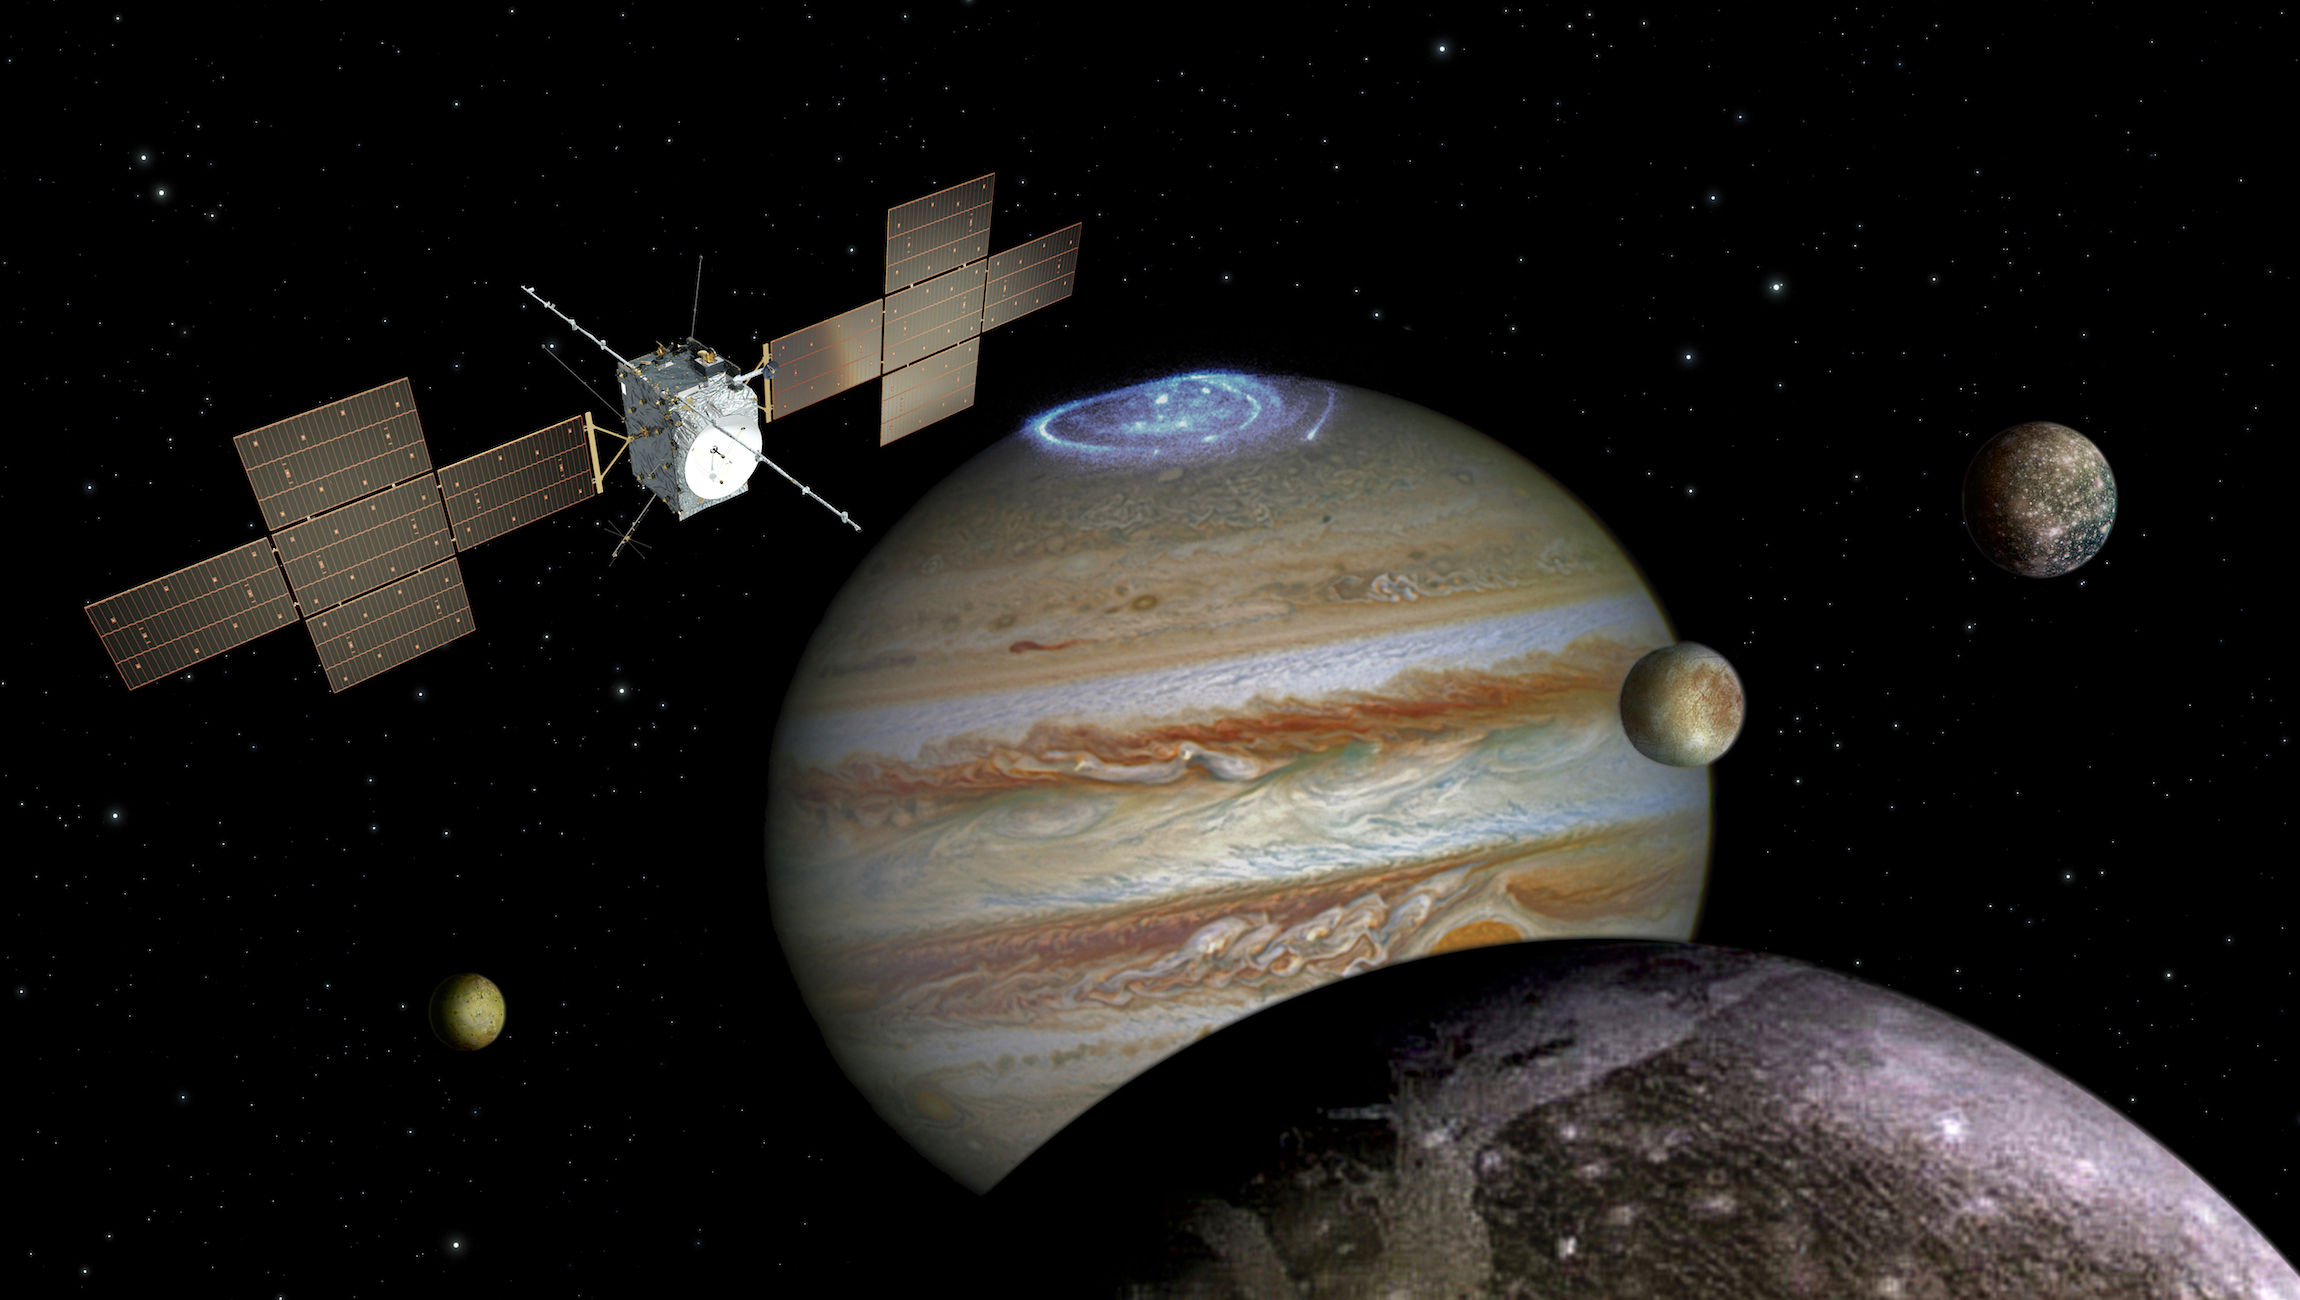 Europe launches the JUICE spacecraft to explore Jupiter’s icy moons in unprecedented detail